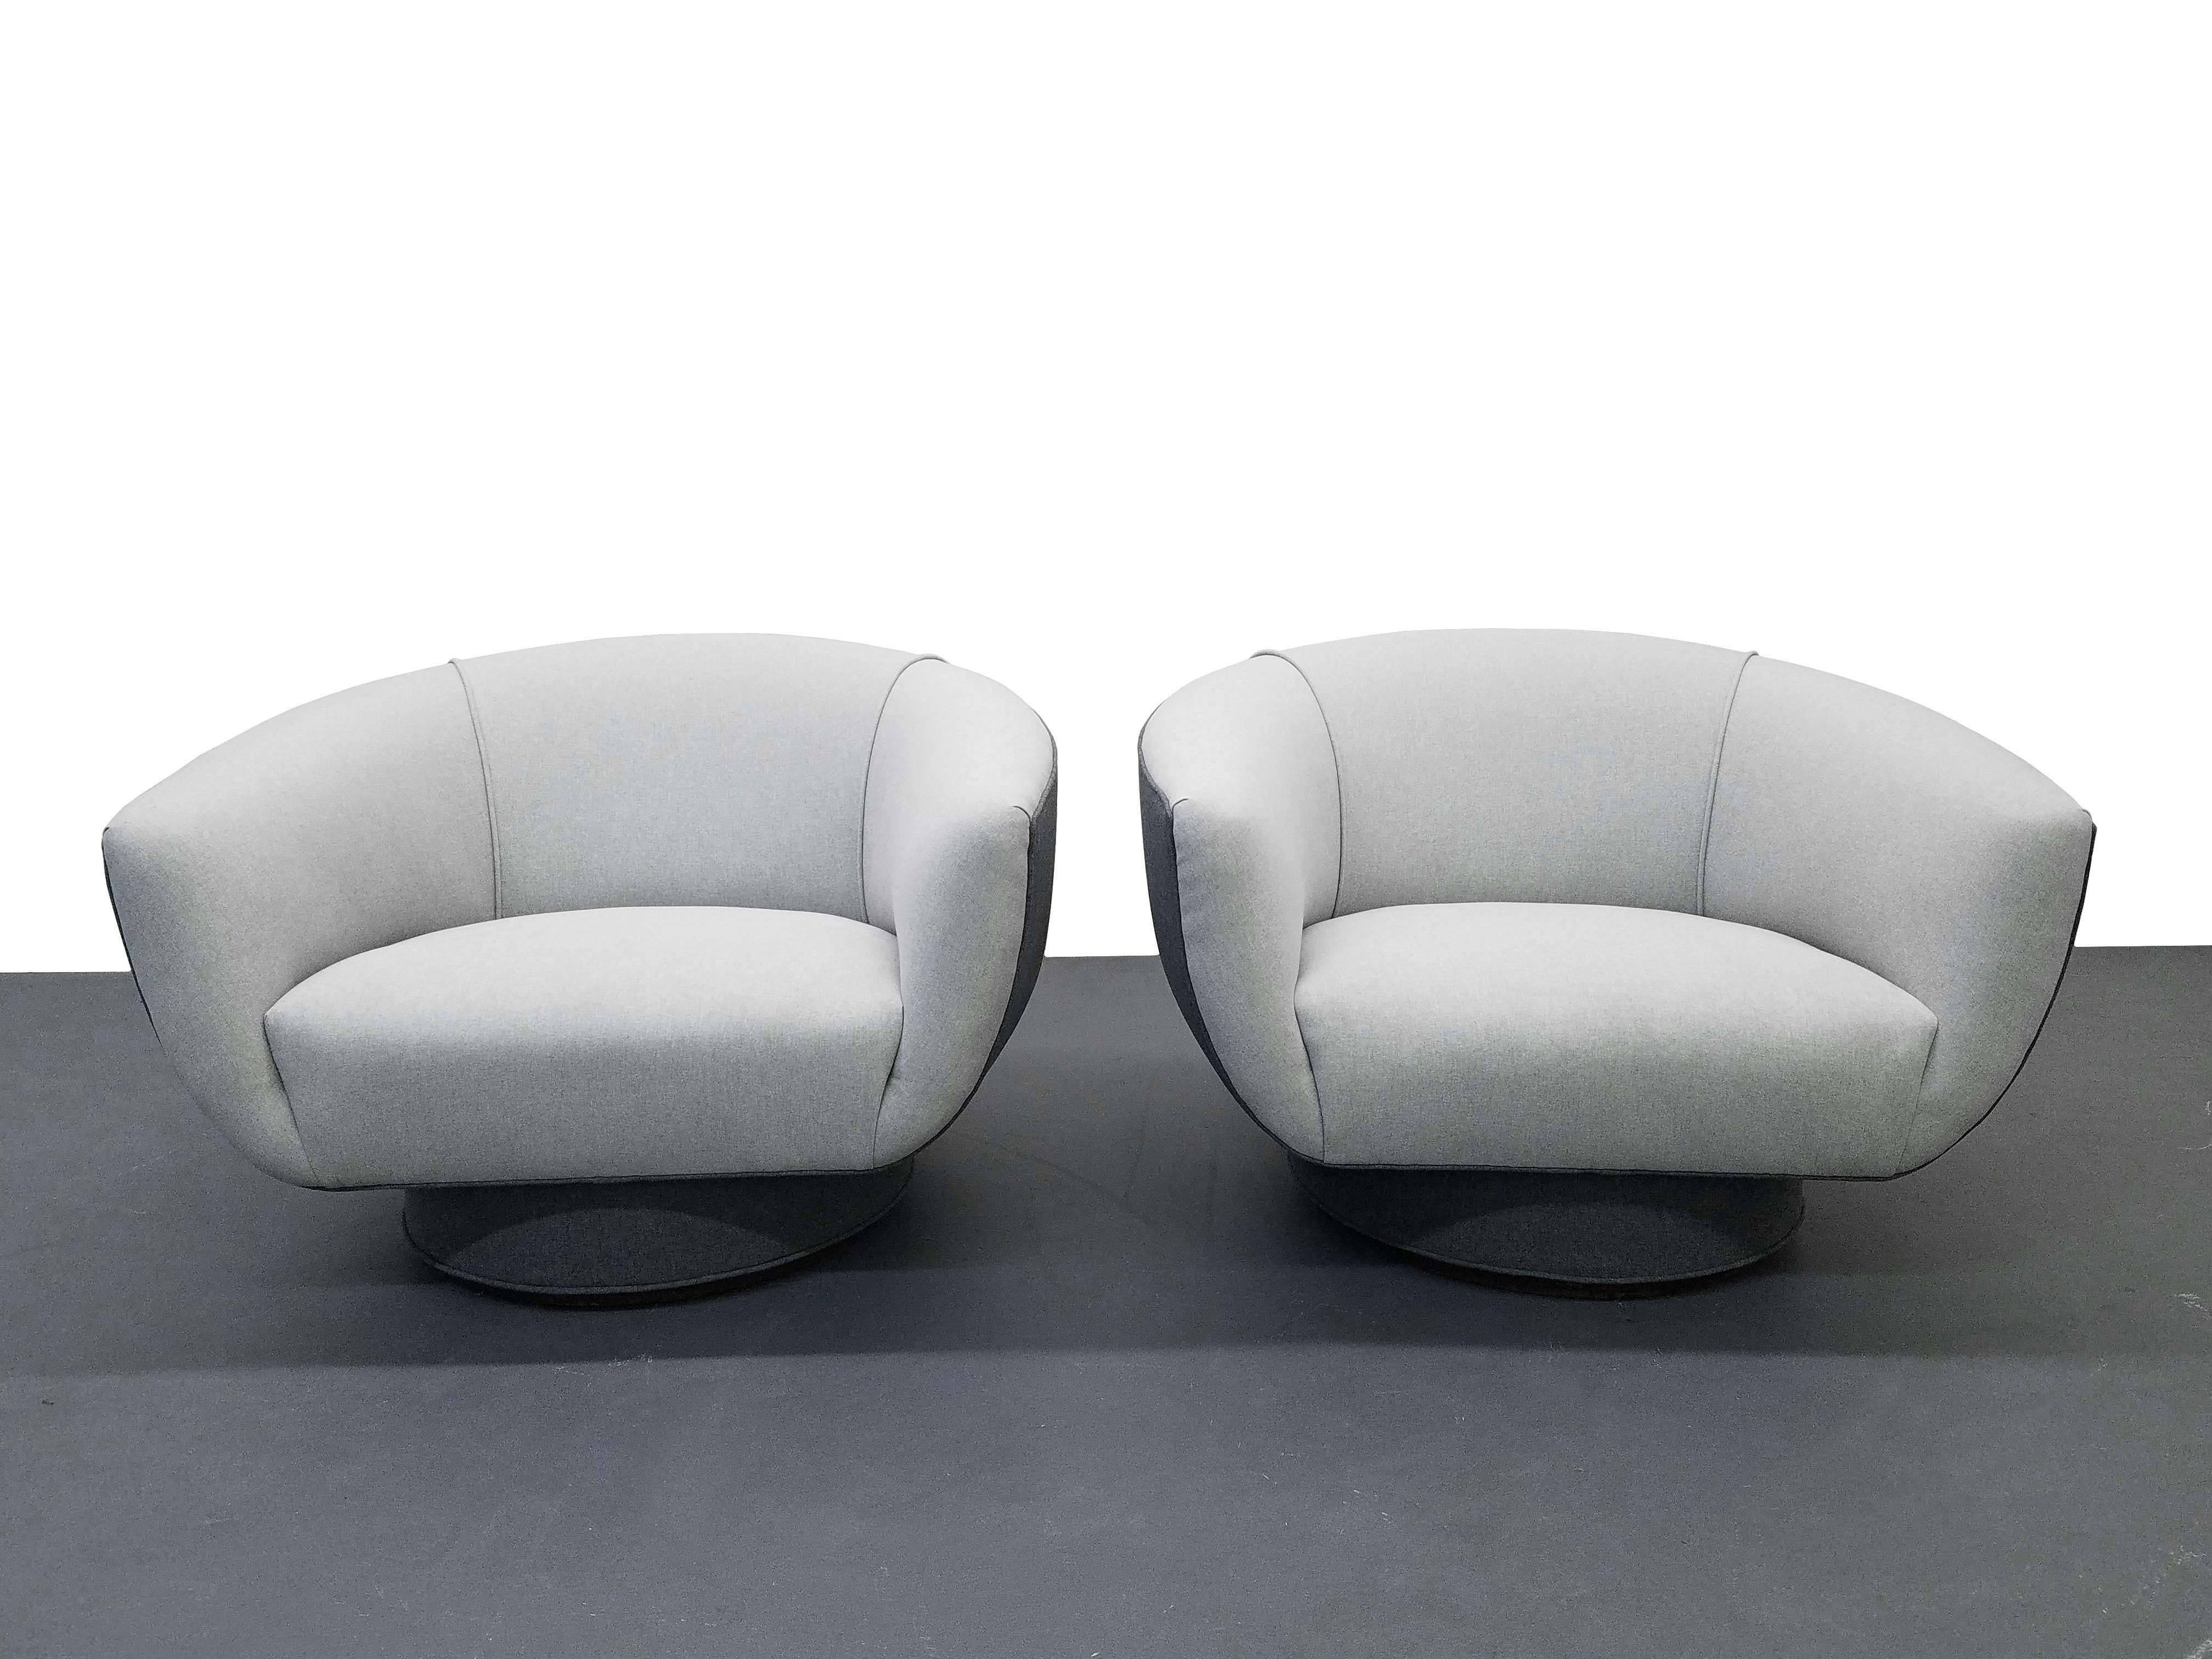 Beautiful oversized pair of Mid-Century swivel lounge chairs by Harvey Probber. Chairs have beautiful shape and style. 

The chairs have been modernized from they're original tufted white vinyl to a soft tone on tone grey cotton based felt fabric.